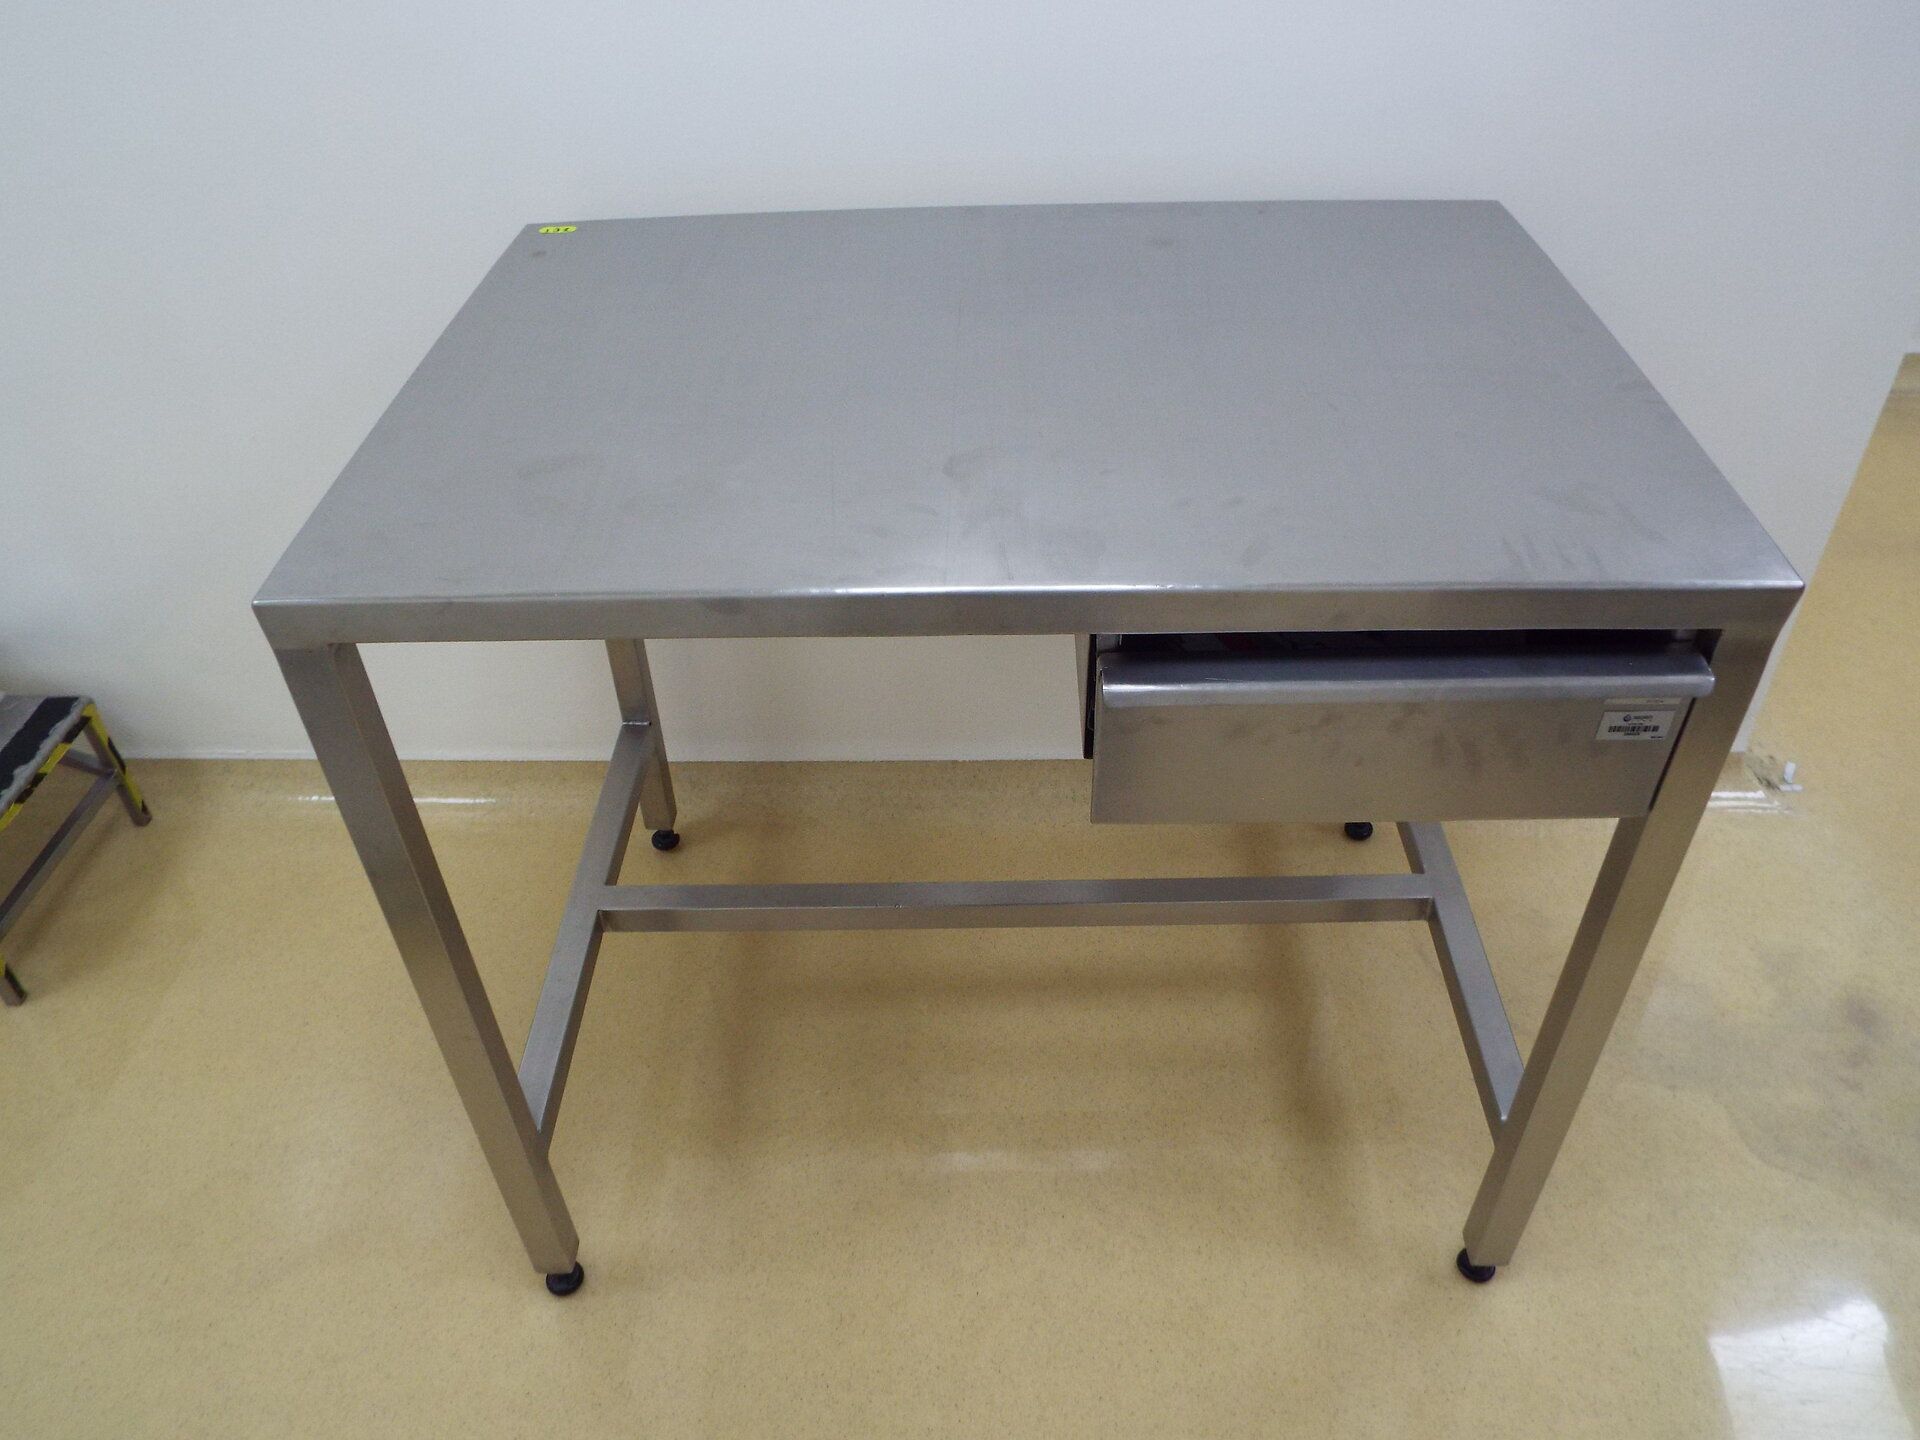 Stainless steel table with 1 drawer